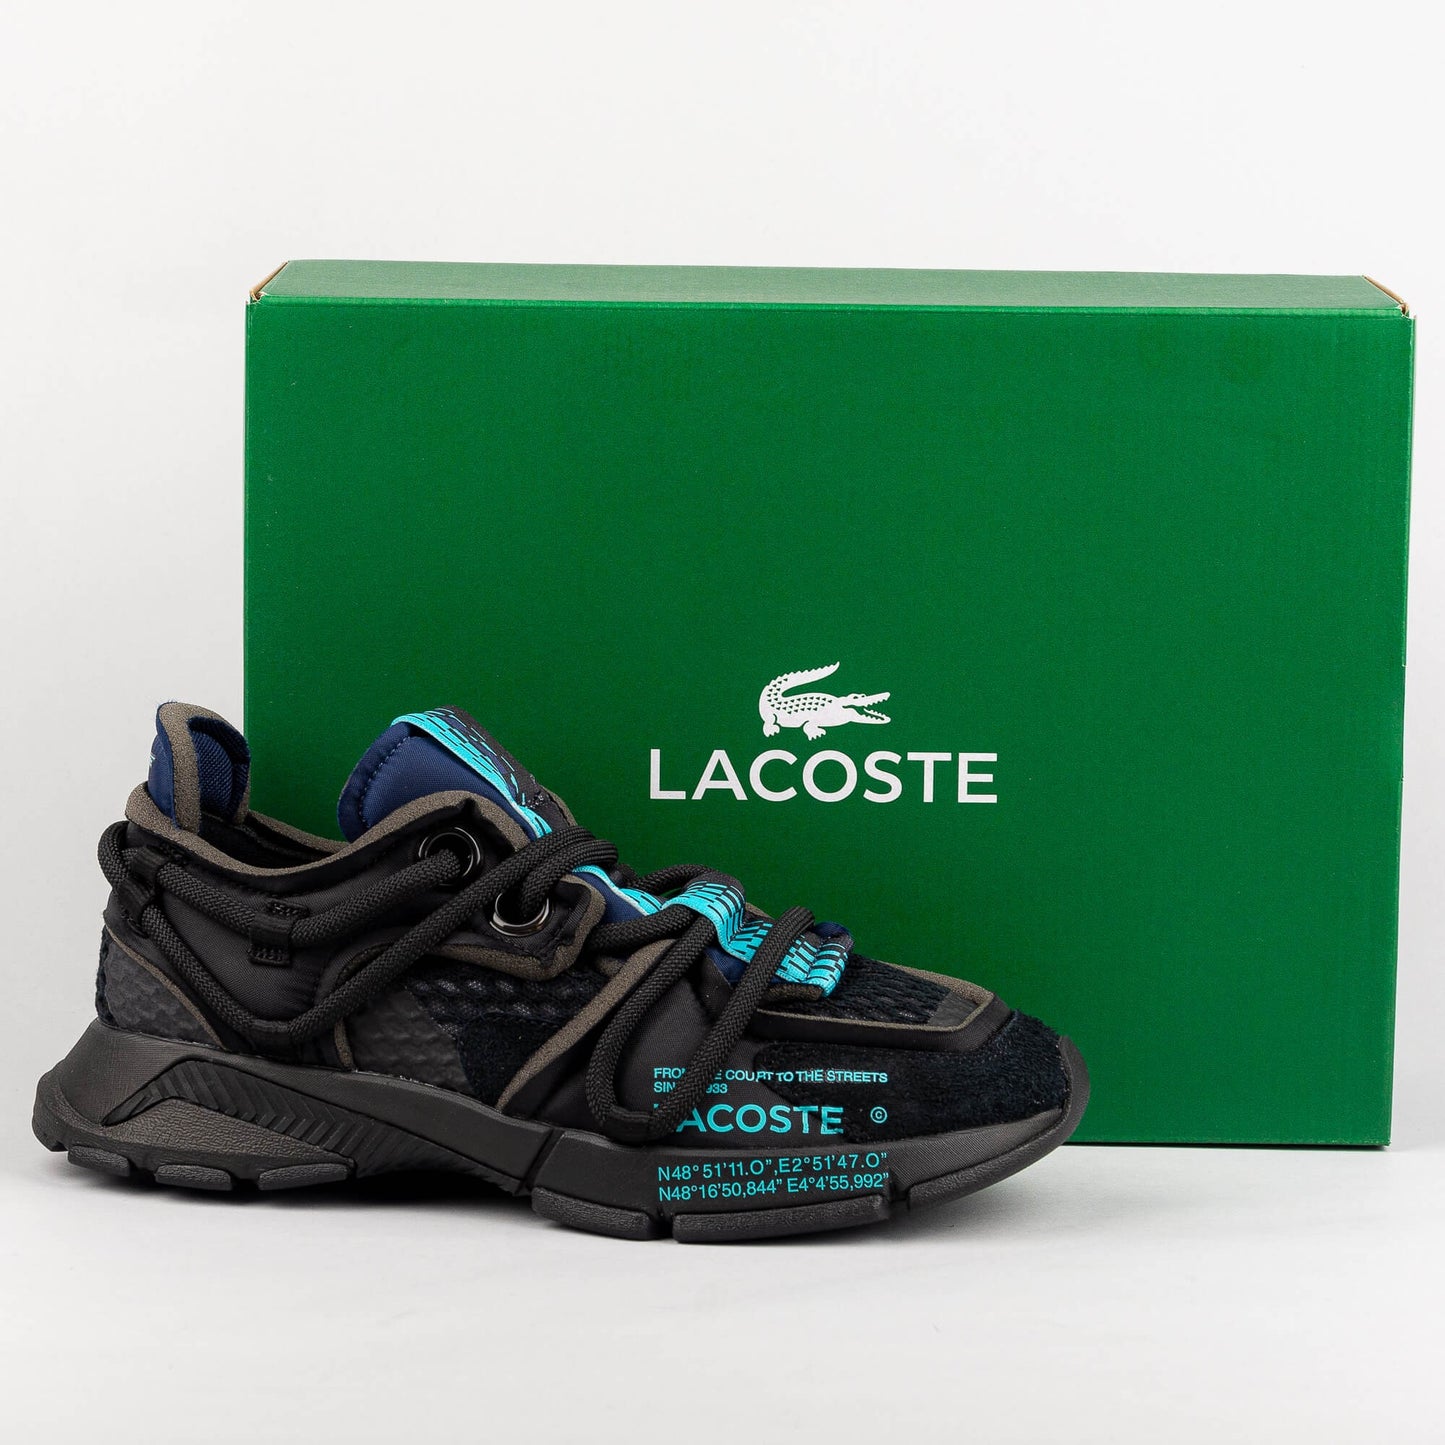 LACOSTE L003 ACTIVE RUNWAY BLK/NVY